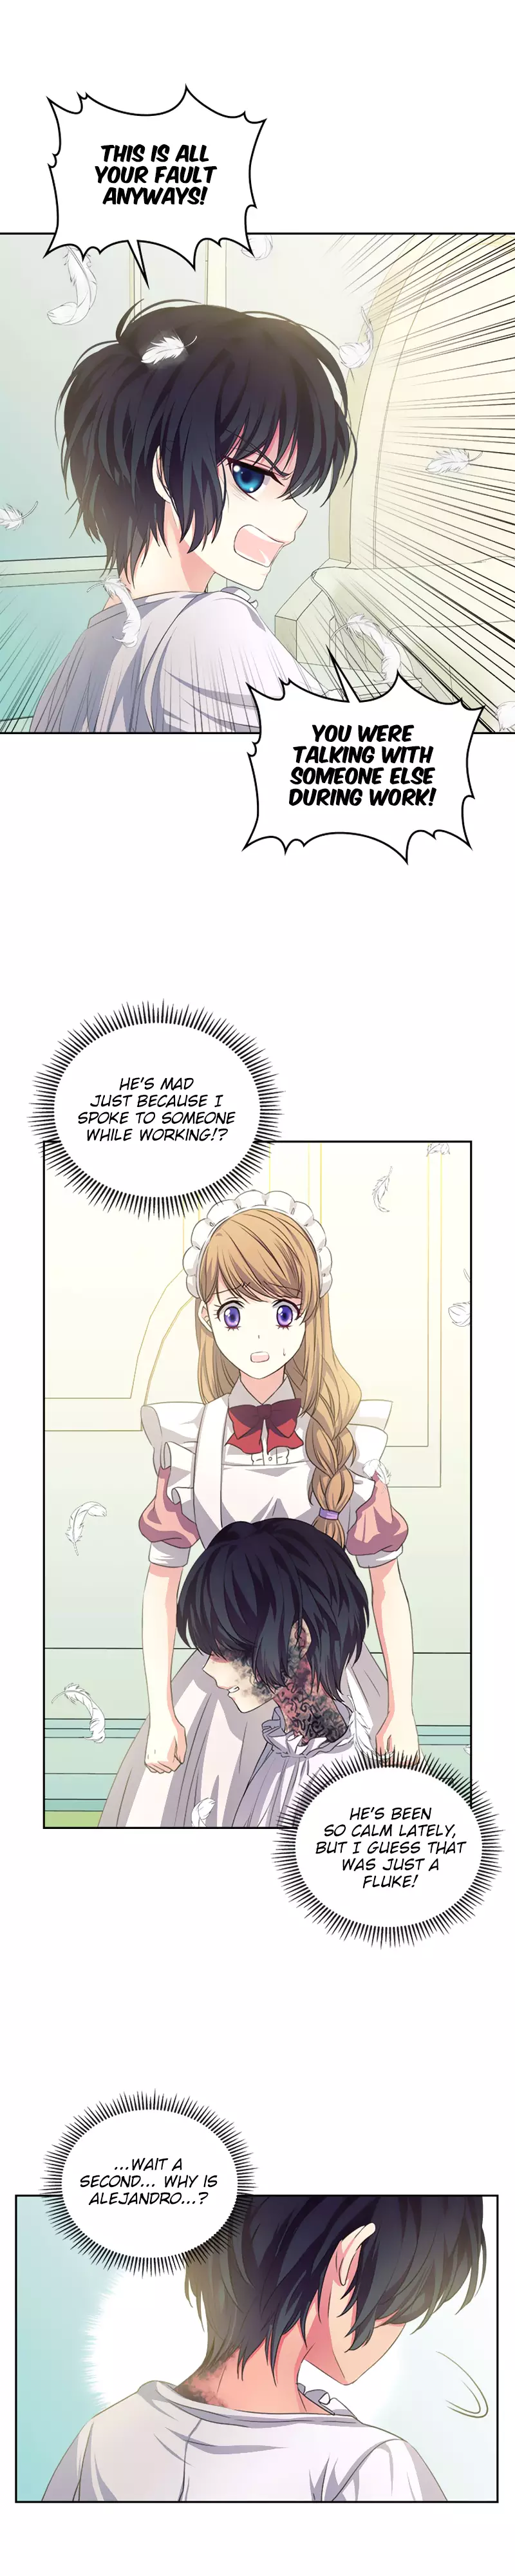 Sincerely: I Became A Duke's Maid - 19 page 4